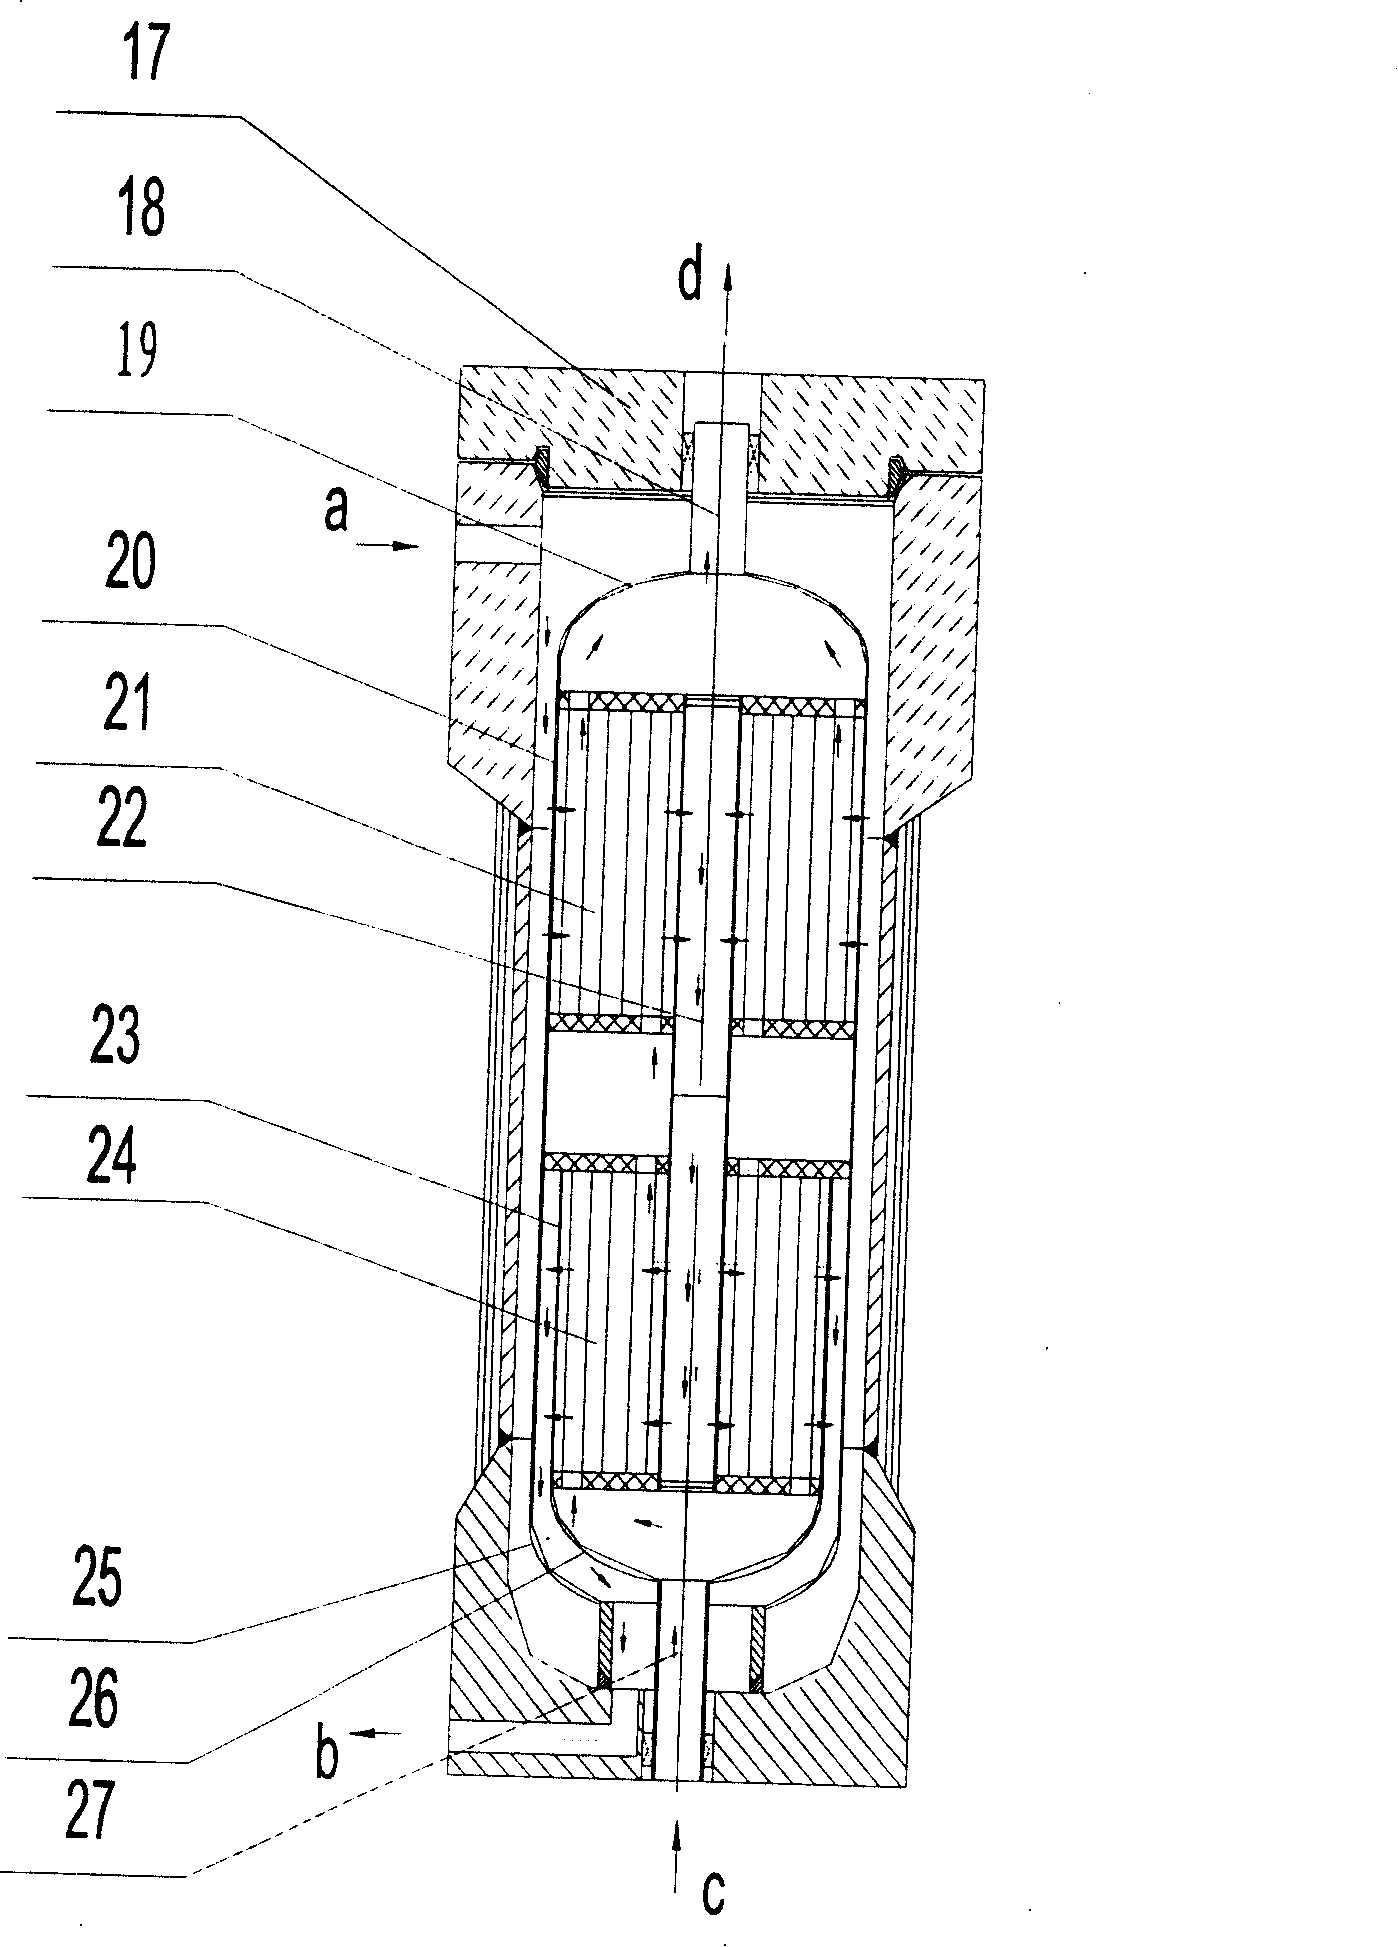 Externally heated medium and high pressure process and apparatus for synthesizing material ammonia with methanol and methane